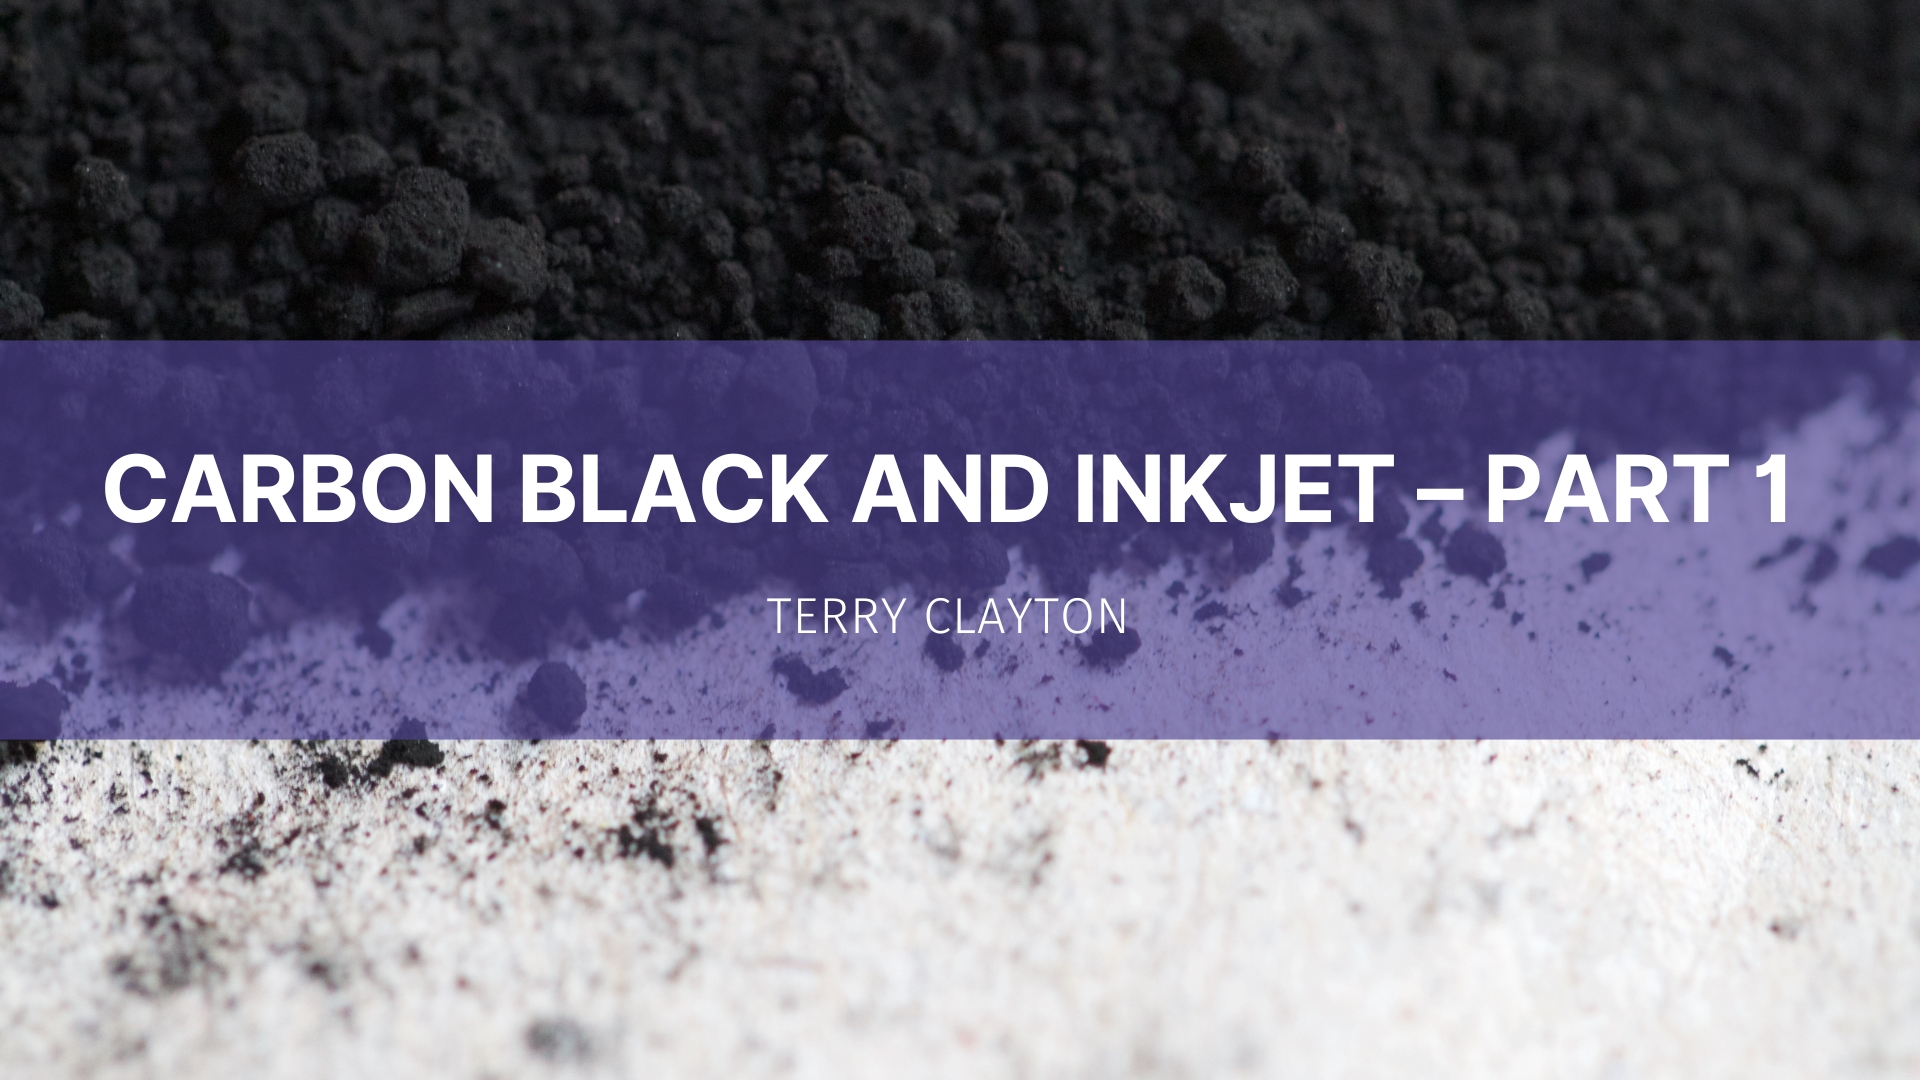 Featured image for “Carbon Black and Inkjet – Part 1”